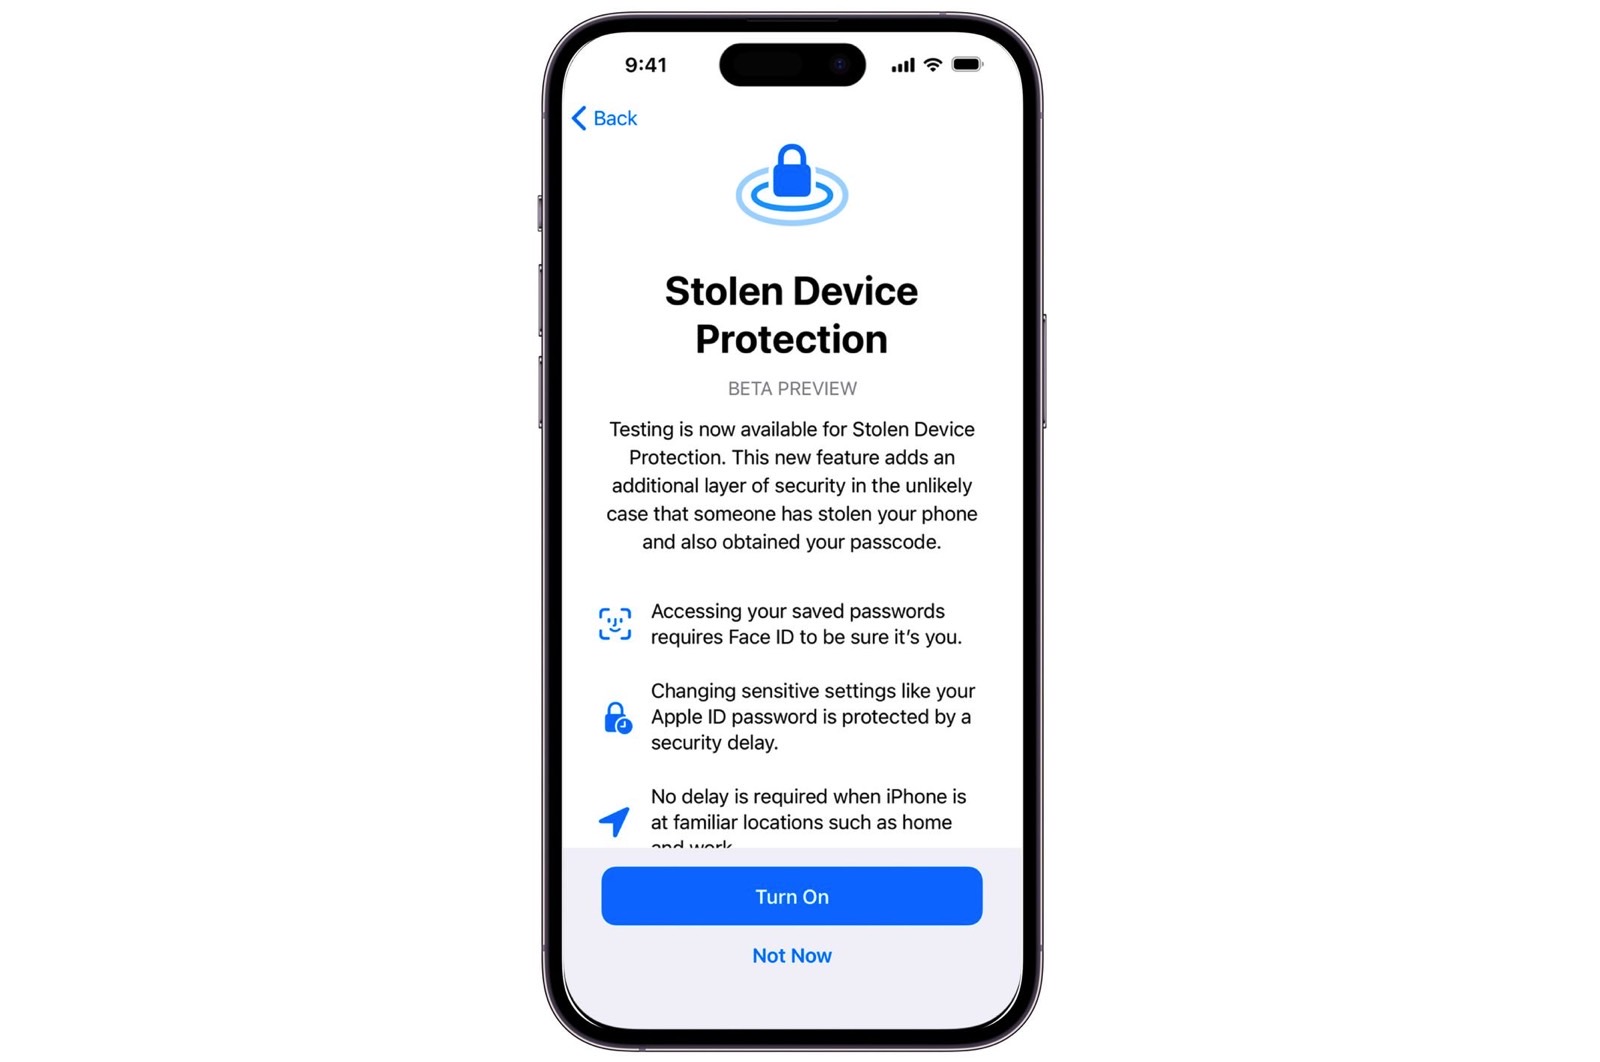 The new Stolen Device Protection feature coming via iOS 17.3.